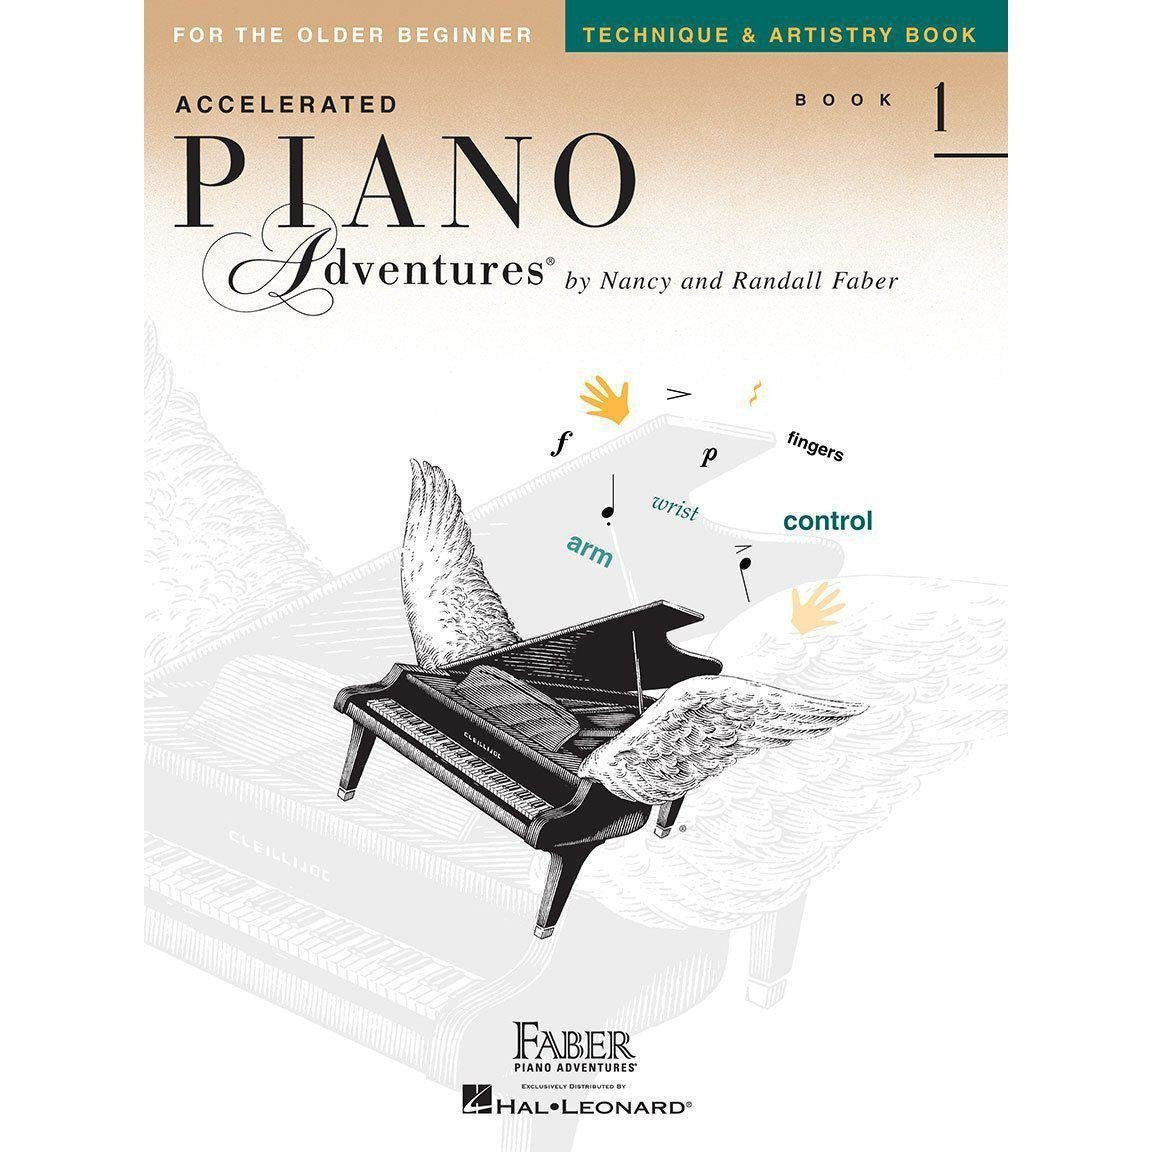 Faber Accelerated Piano Adventures-1-Tech & Artistry-Andy's Music